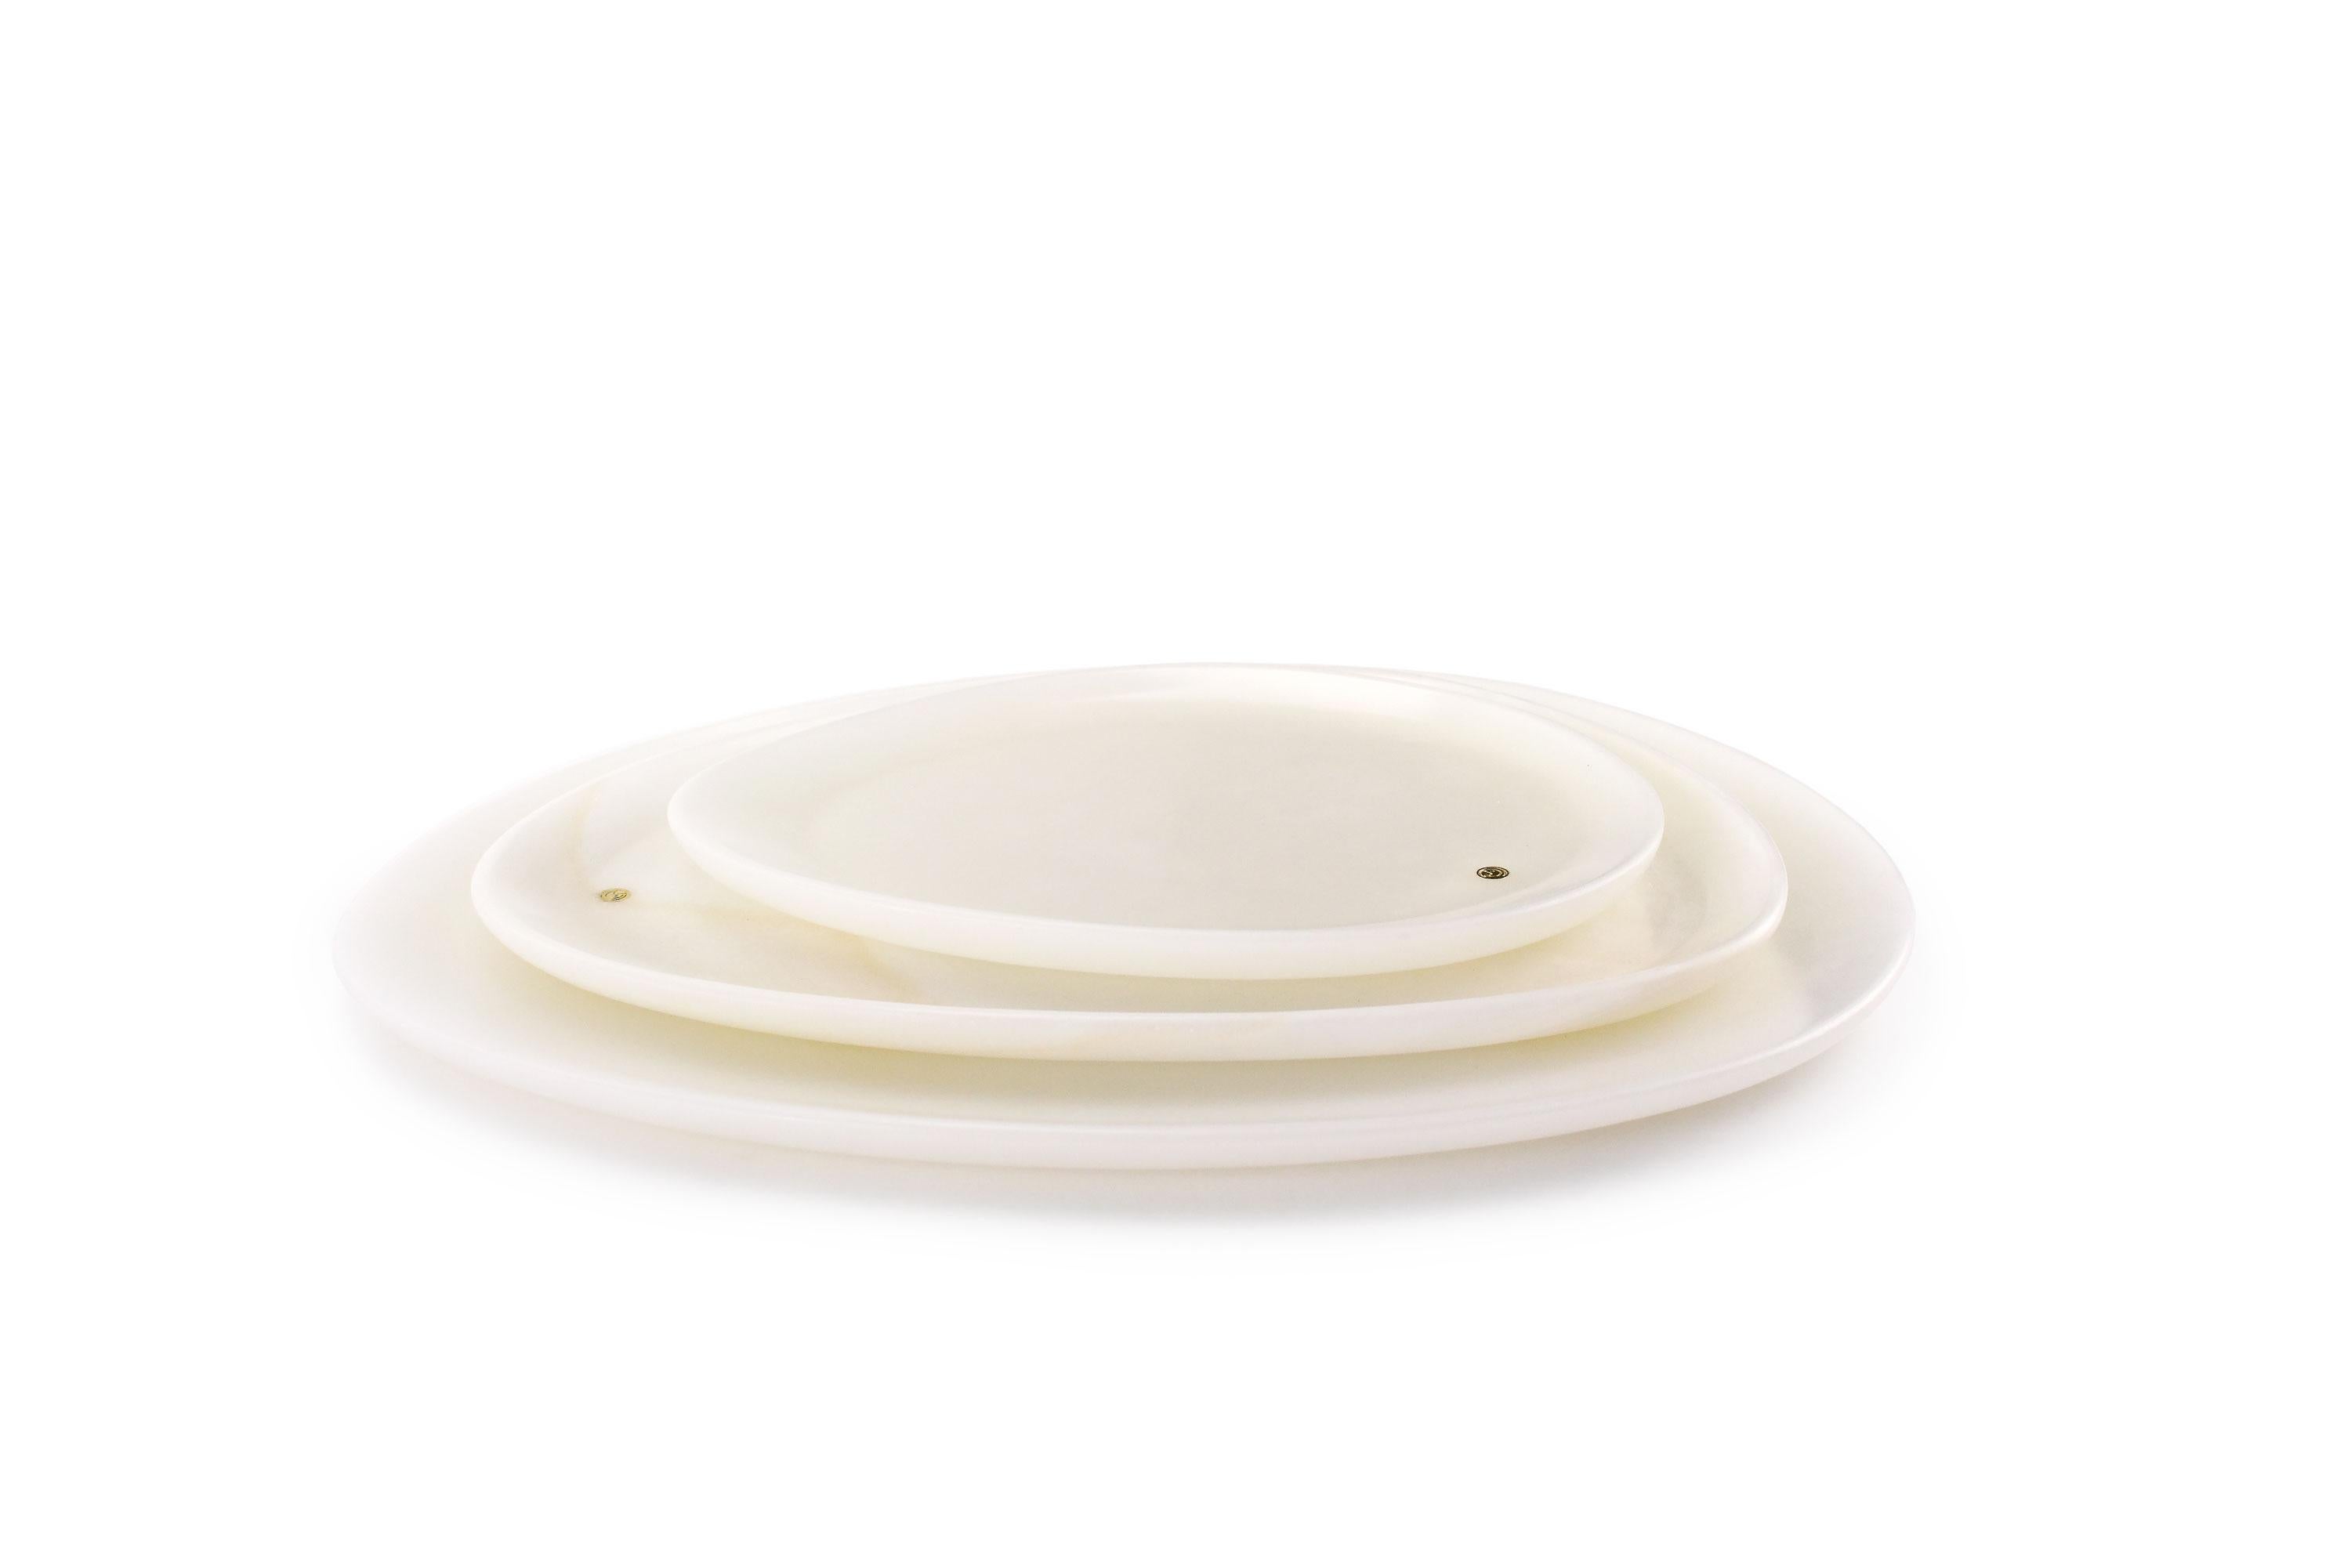 Hand carved presentation plates in white onyx. Multiple use as plates, platters and placers. The polished finishing underlines the transparency of the onyx making this a very precious object. 

Dimensions: Small - L24 W20 H1.8 cm, Medium - L30 W28